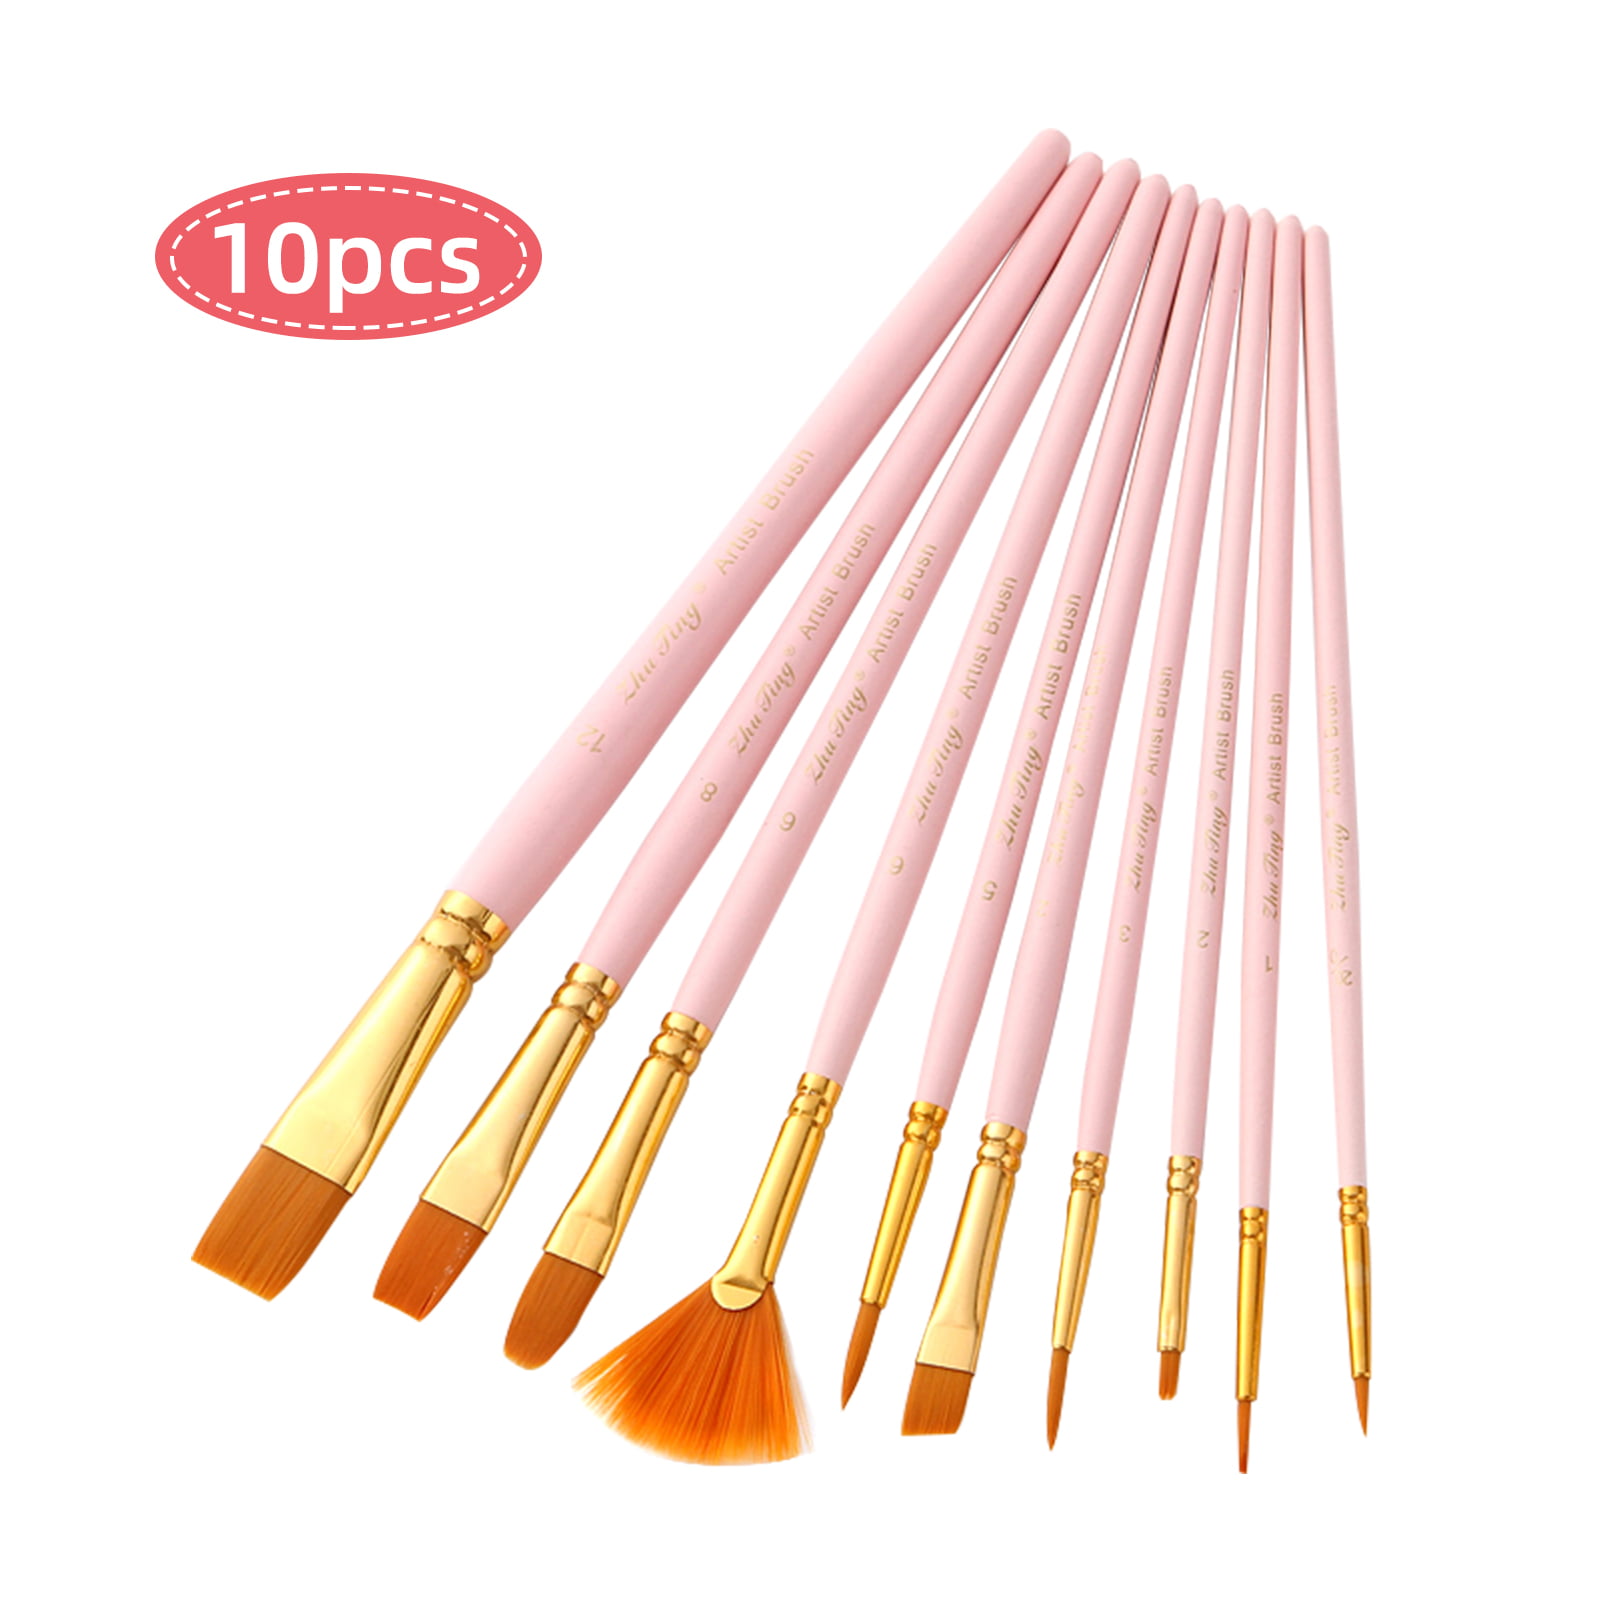 Abanopi 10pcs Watercolor Paint Brushes Set Nylon Hair Artist Paintbrushes with Fan for Acrylic Oil Gouache Nail Body Face Drawing Arts Crafts Supplies